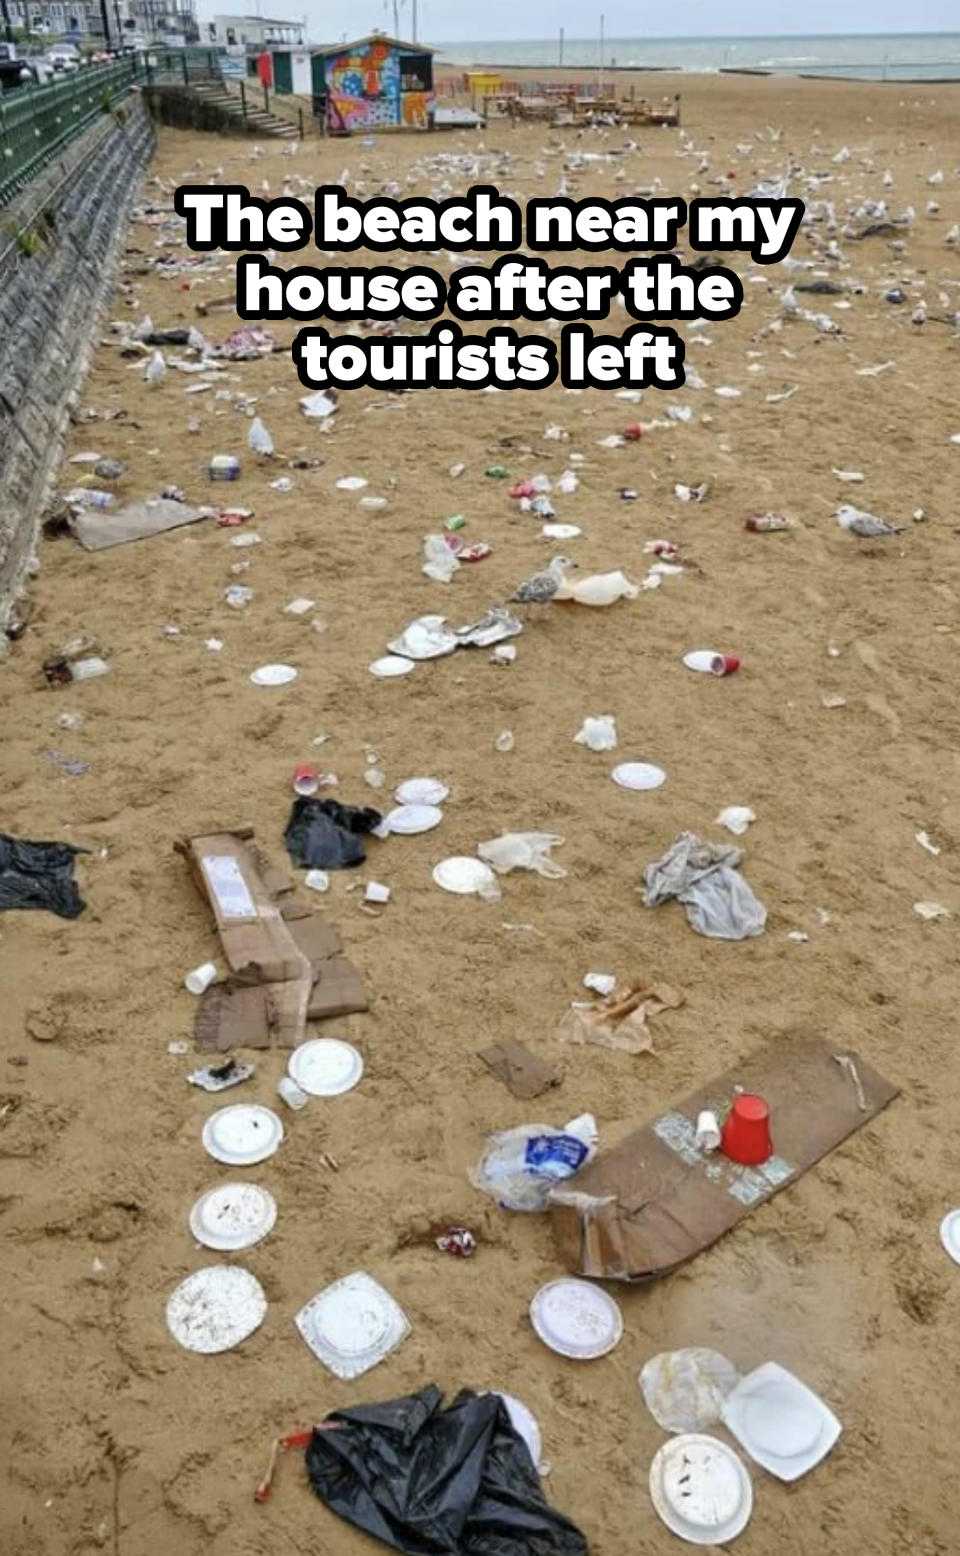 A beach covered in litter, including plastic bottles, plates, cups, and cardboard, with people in the far background and a small colorful structure near the horizon